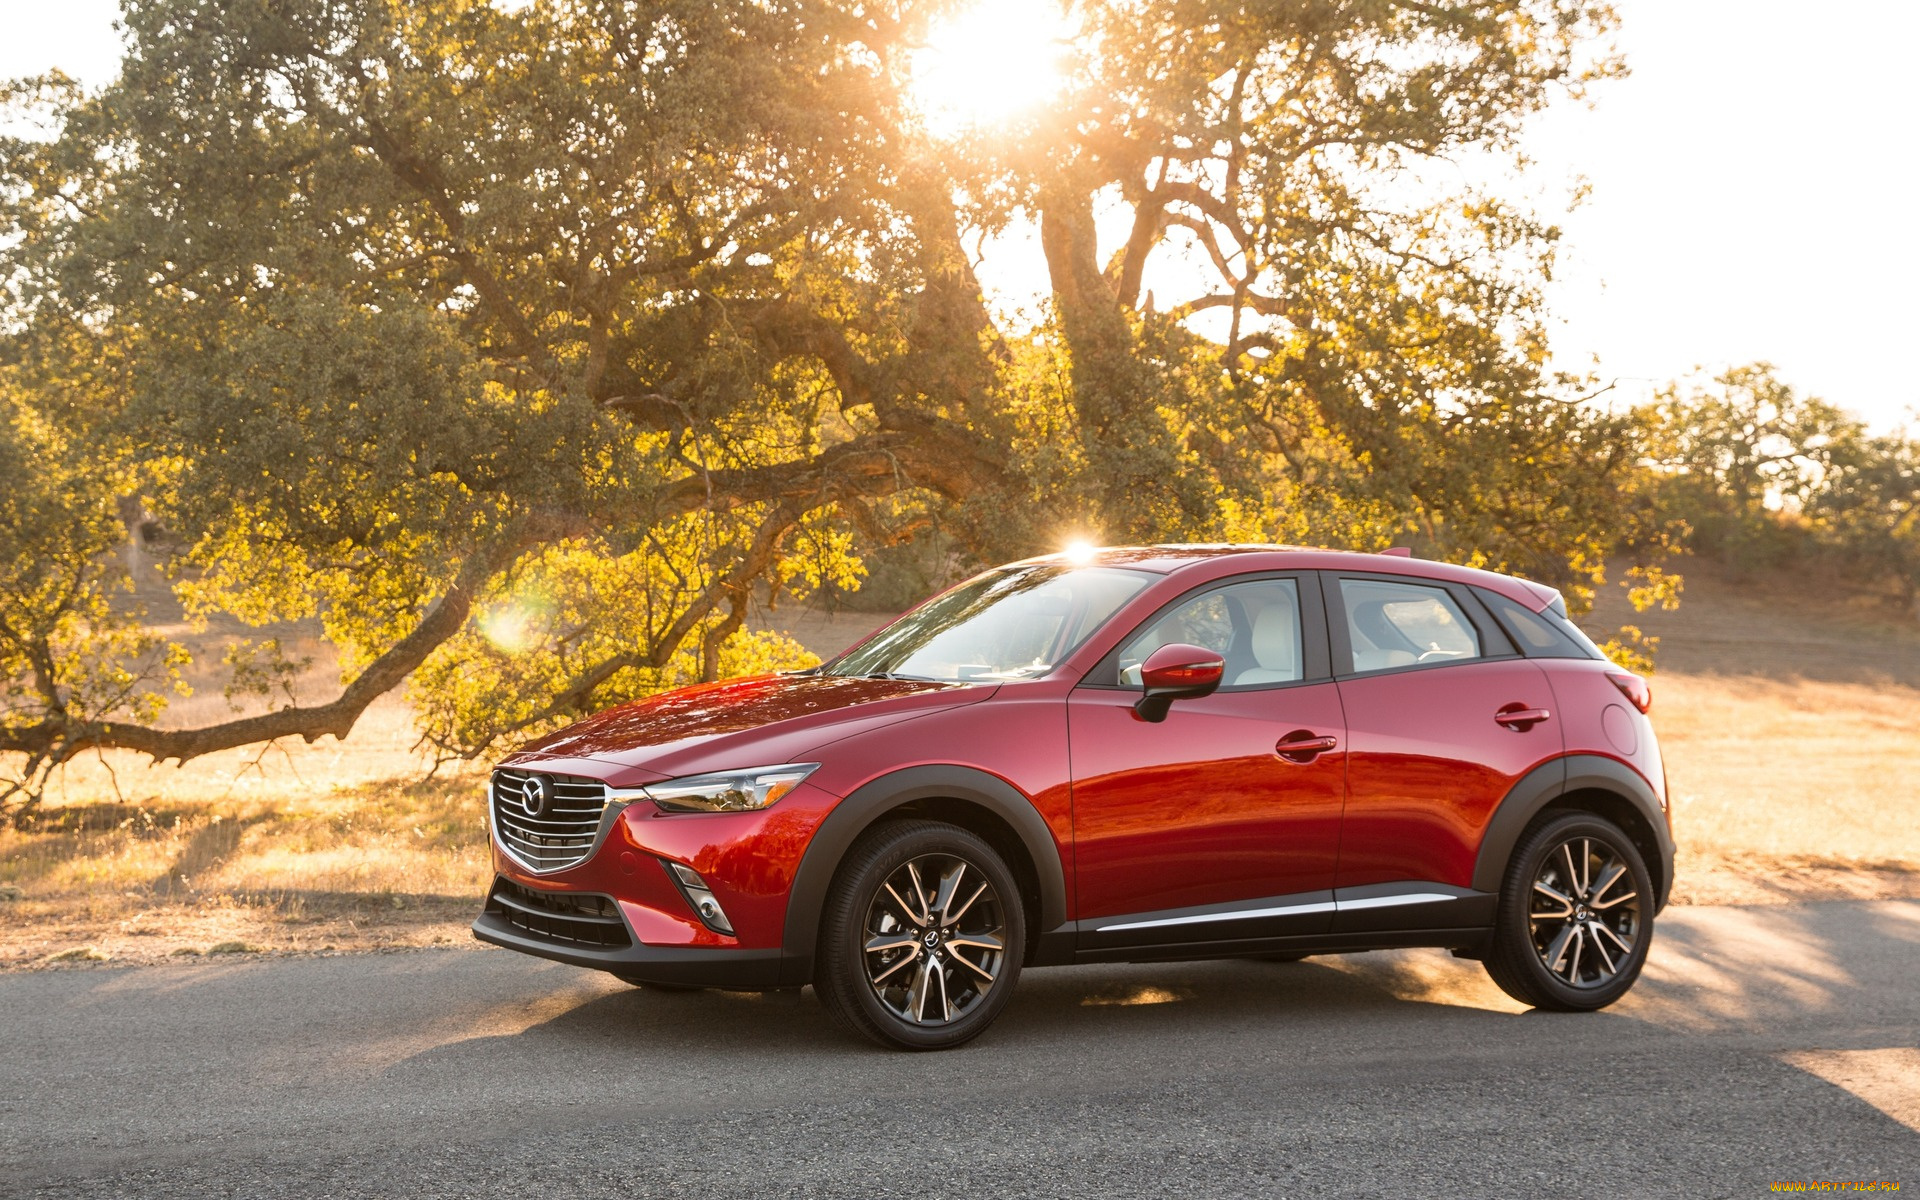 mazda, cx-3, review, subcompact, crossover, 2018, автомобили, mazda, 2018, crossover, cx-3, review, subcompact, red